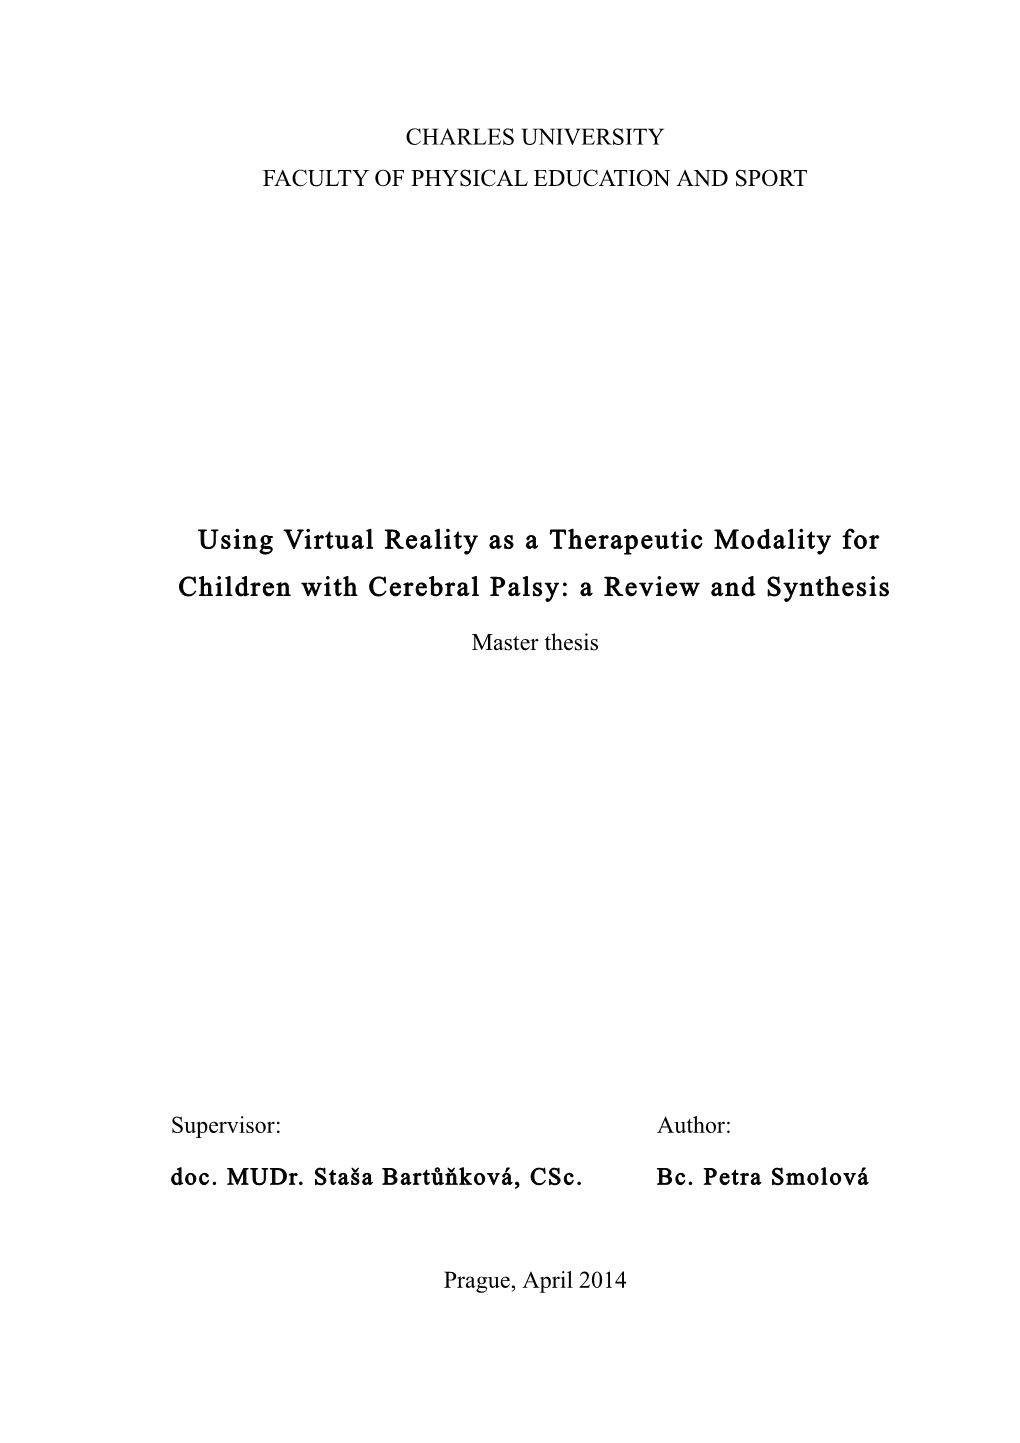 Using Virtual Reality As a Therapeutic Modality for Children with Cerebral Palsy: a Review and Synthesis